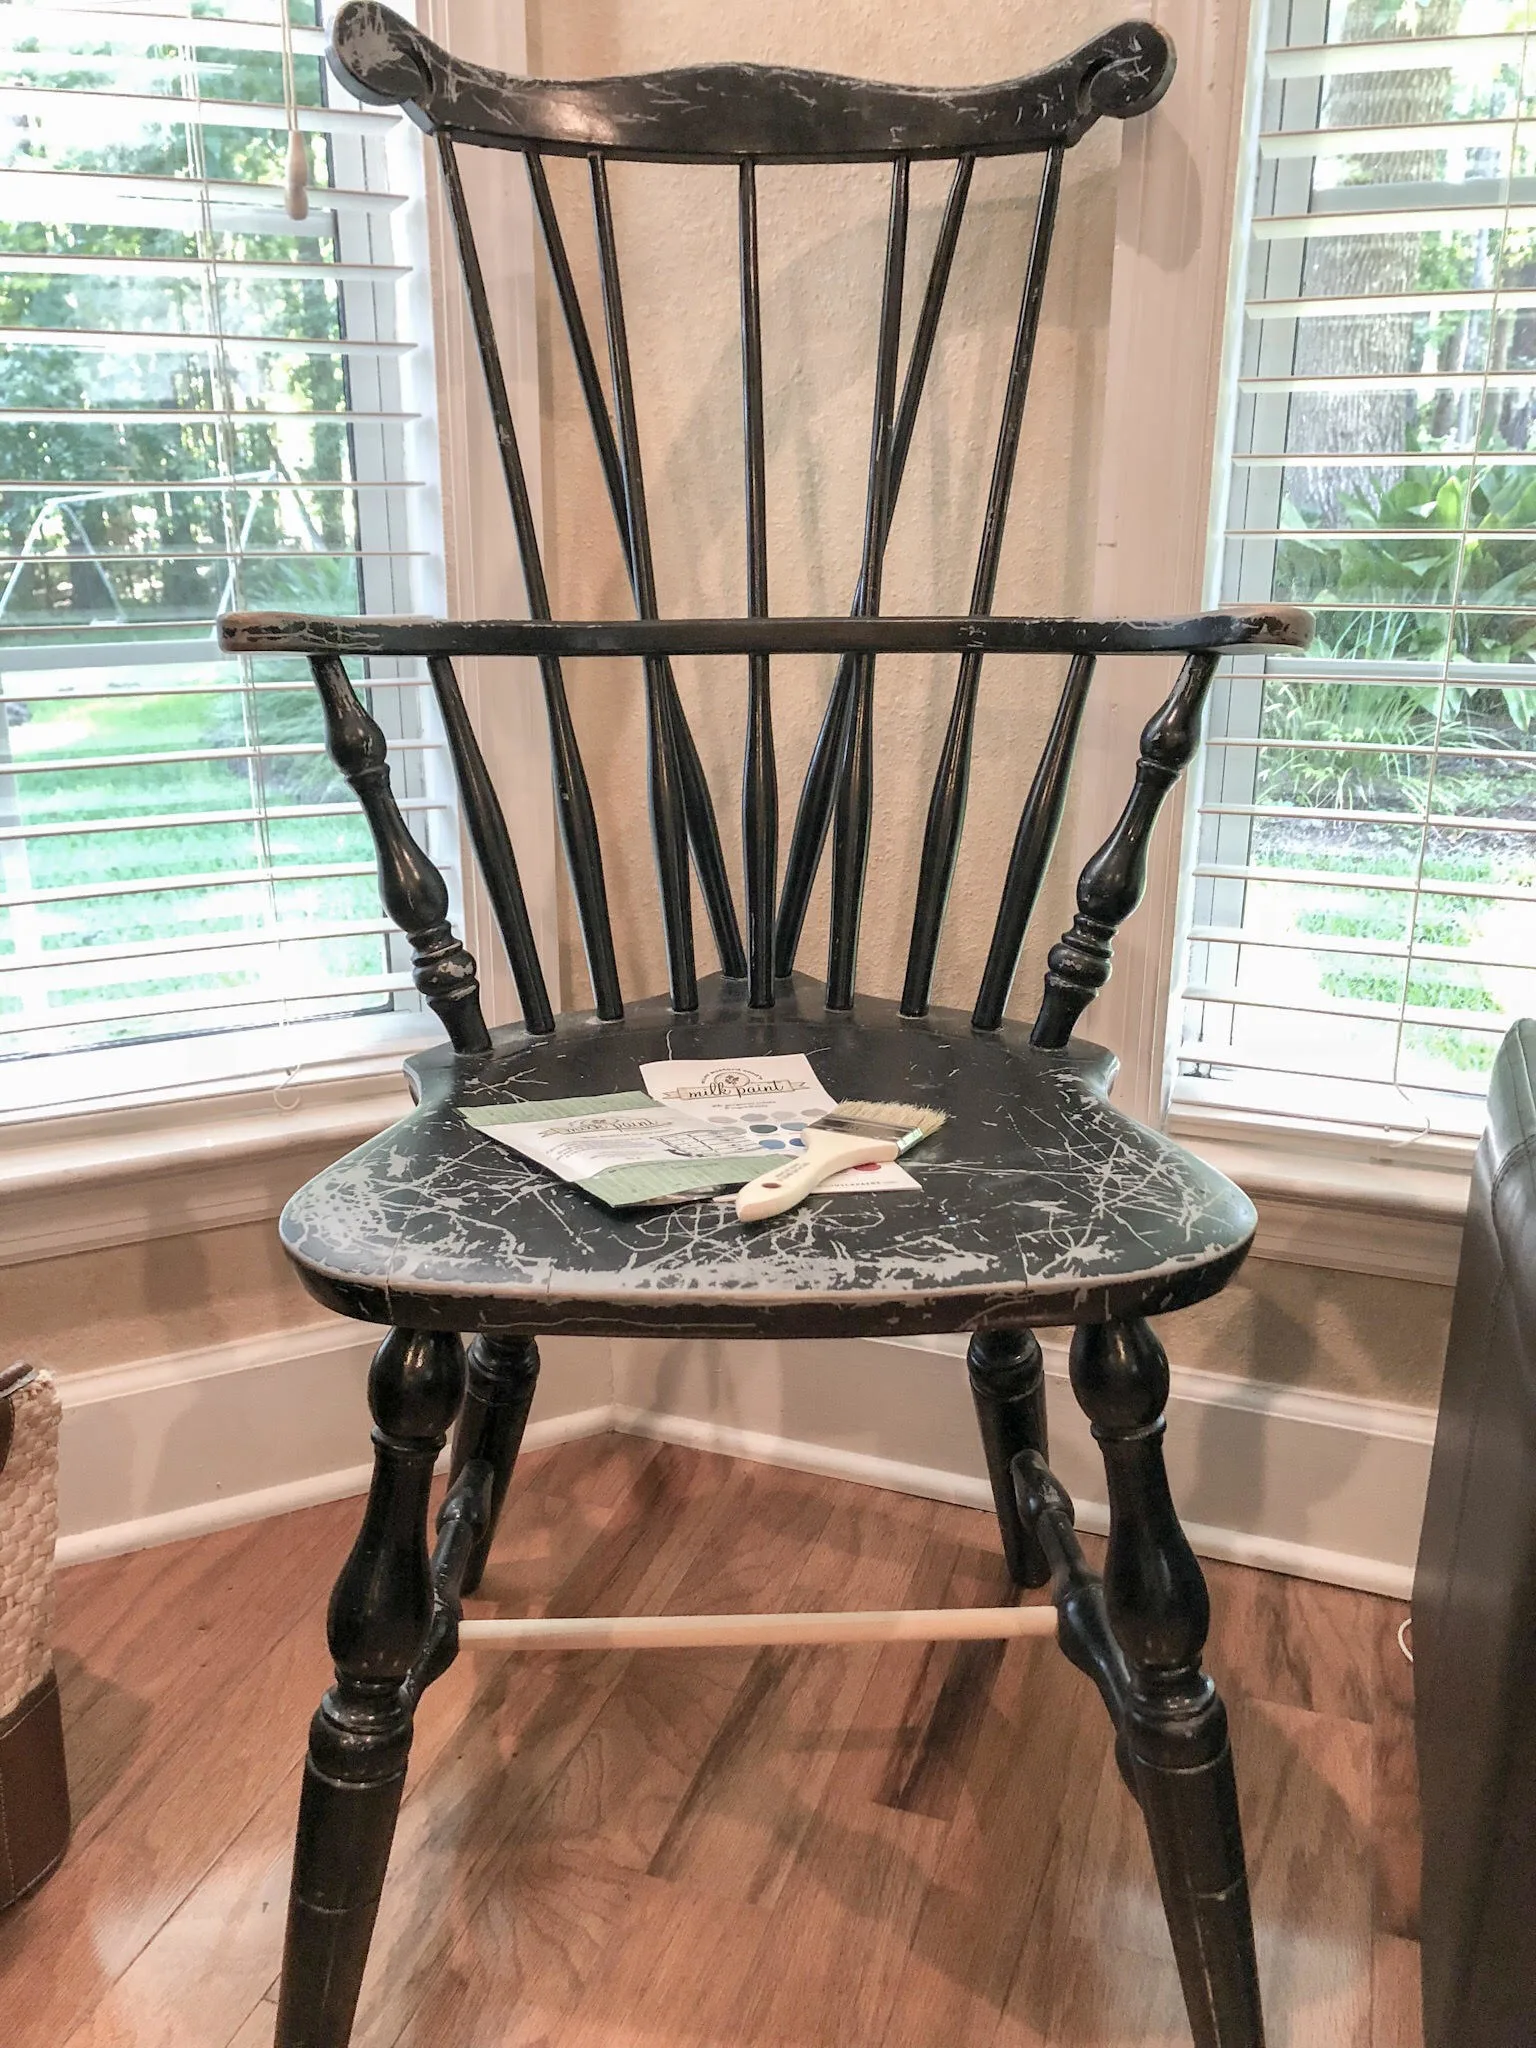 Black windsor chair that was repaired and ready to be painted with Miss Mustard Seed Paint.